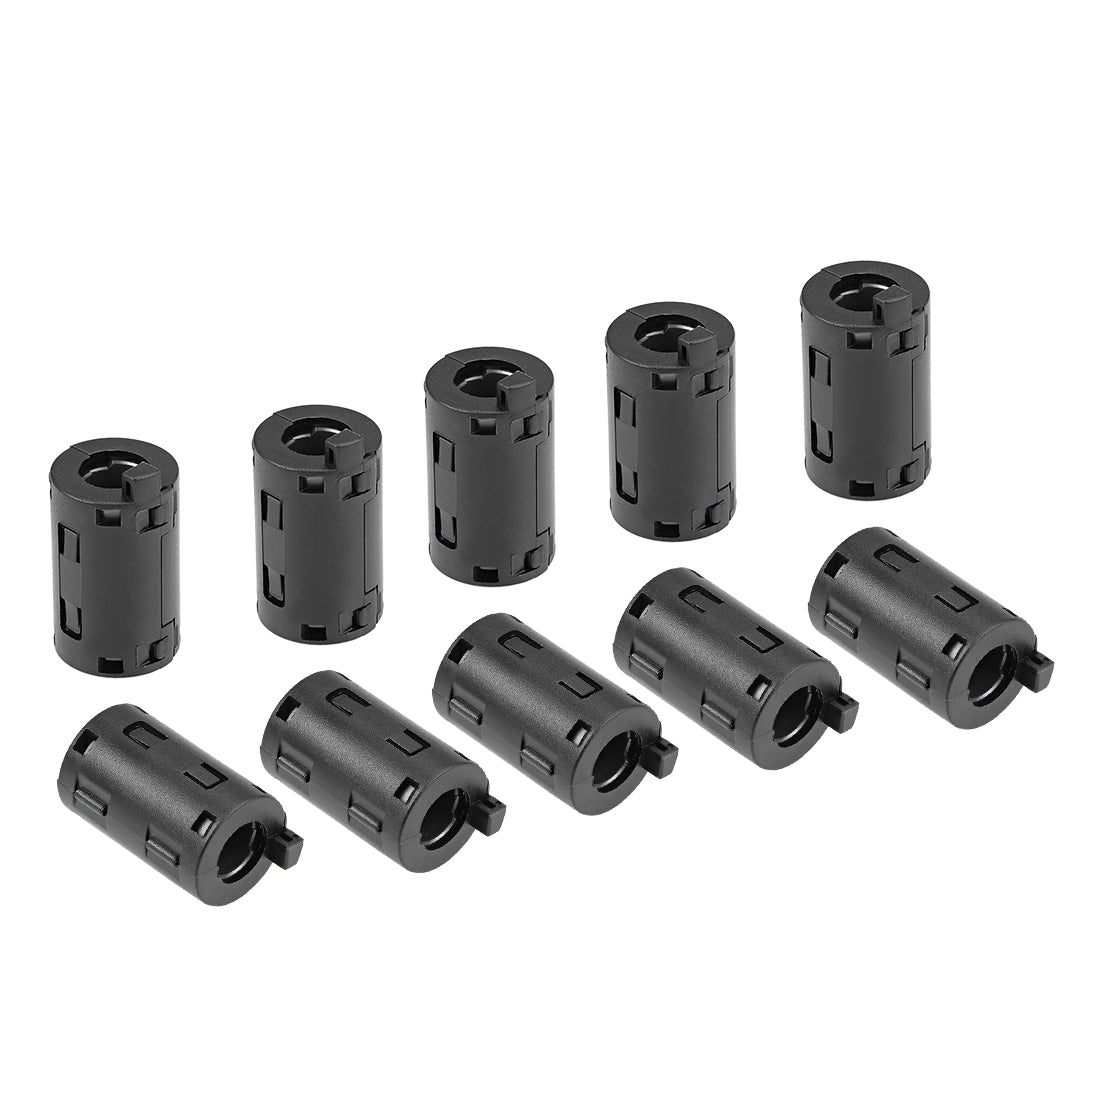 uxcell Uxcell 11mm Ferrite Cores Ring Clip-On RFI EMI Noise Suppression Filter Cable Clip, Black 10pcs